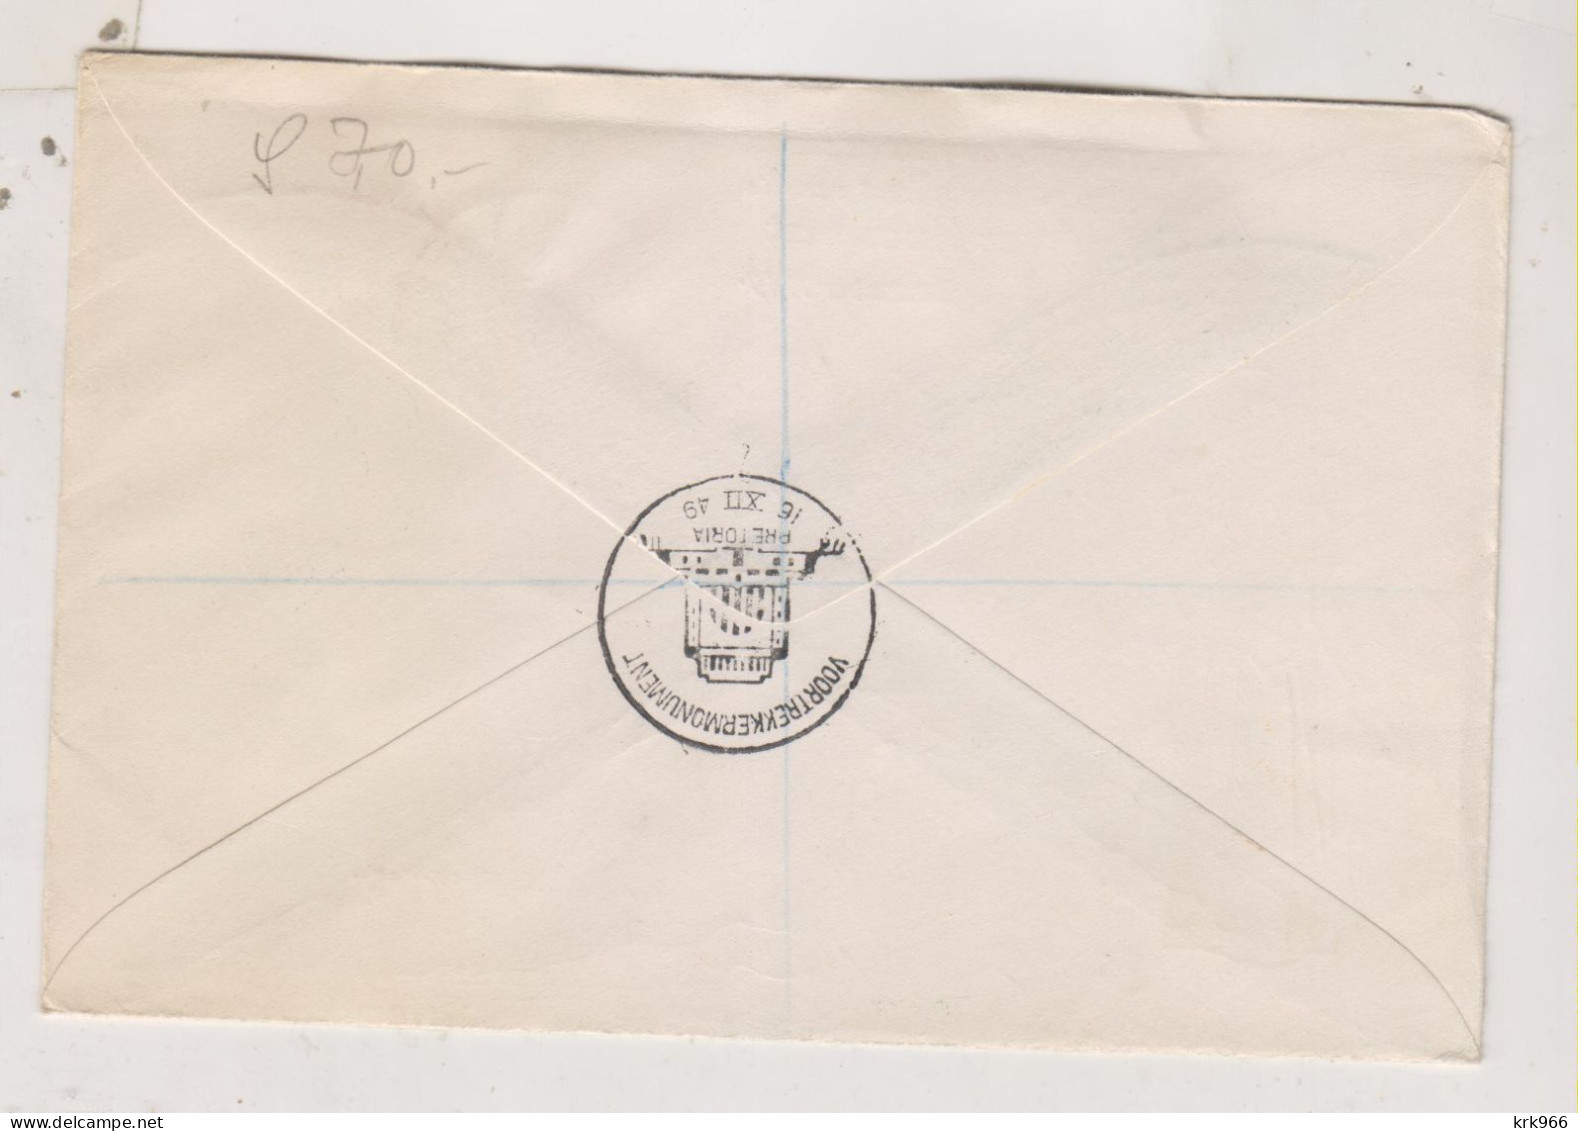 SOUTH AFRICA 1949 PRETORIA Nice Registered FDC Cover - Luftpost